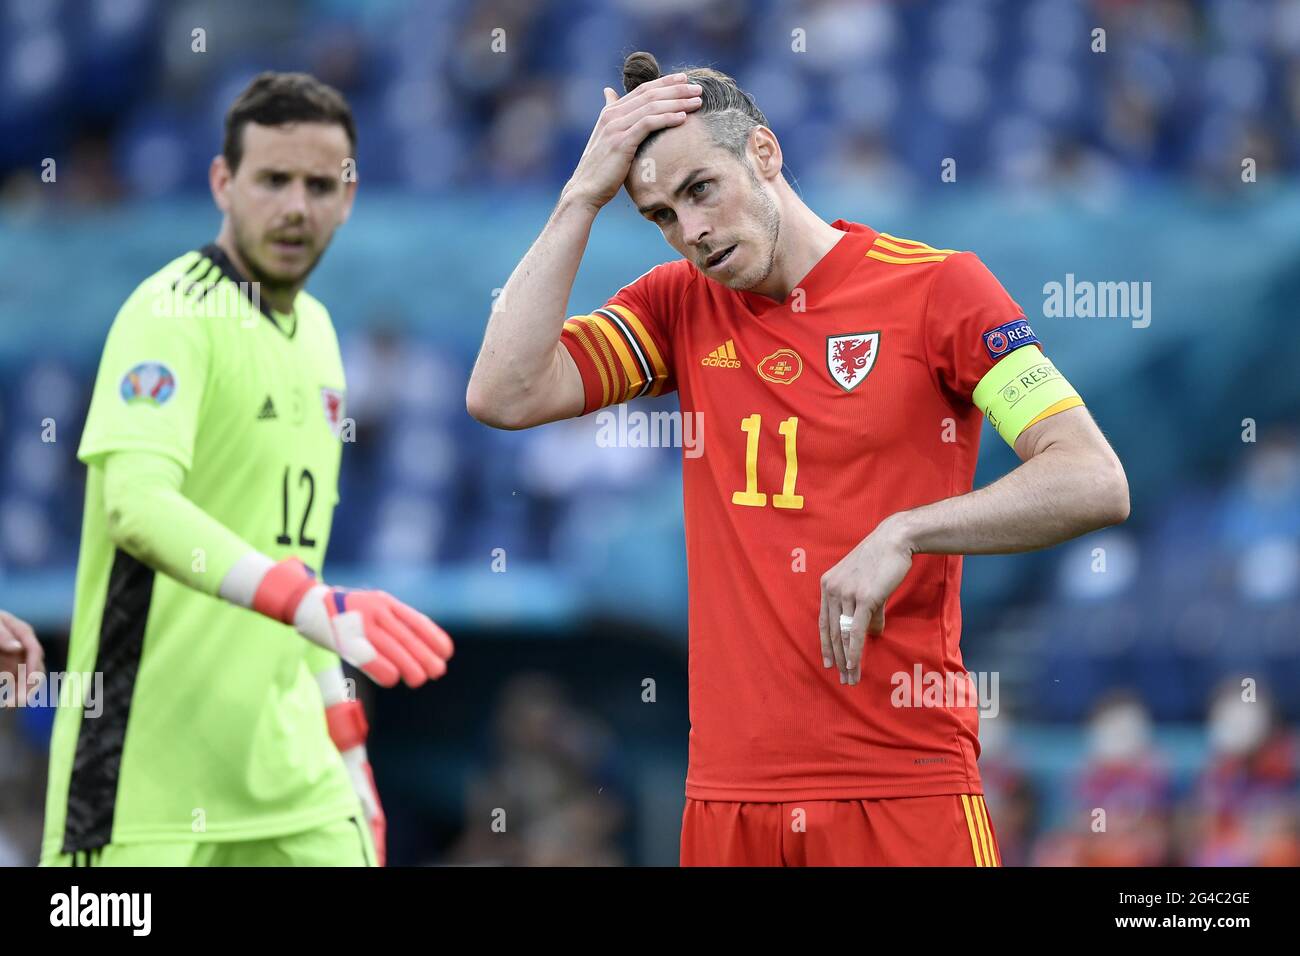 Roma, Italy. 20th June, 2021. Gareth Bale of Wales reacts during the Uefa Euro 2020 Group A football match between Italy and Wales at stadio Olimpico in Rome (Italy), June 20th, 2021. Photo Andrea Staccioli/Insidefoto Credit: insidefoto srl/Alamy Live News Stock Photo